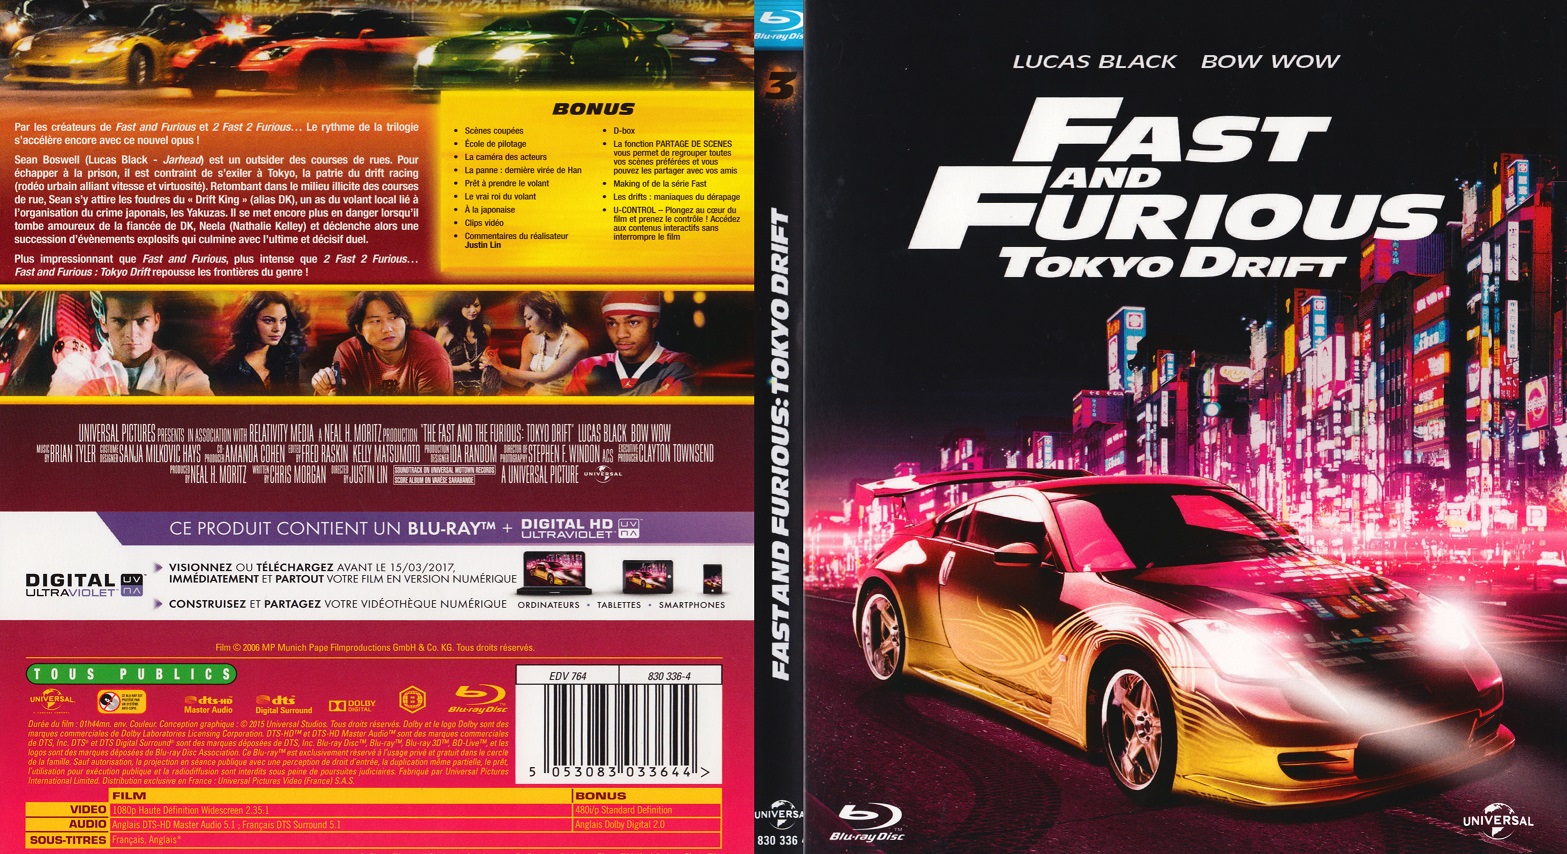 The Fast and The Furious Tokio Drift (2006) Bluray